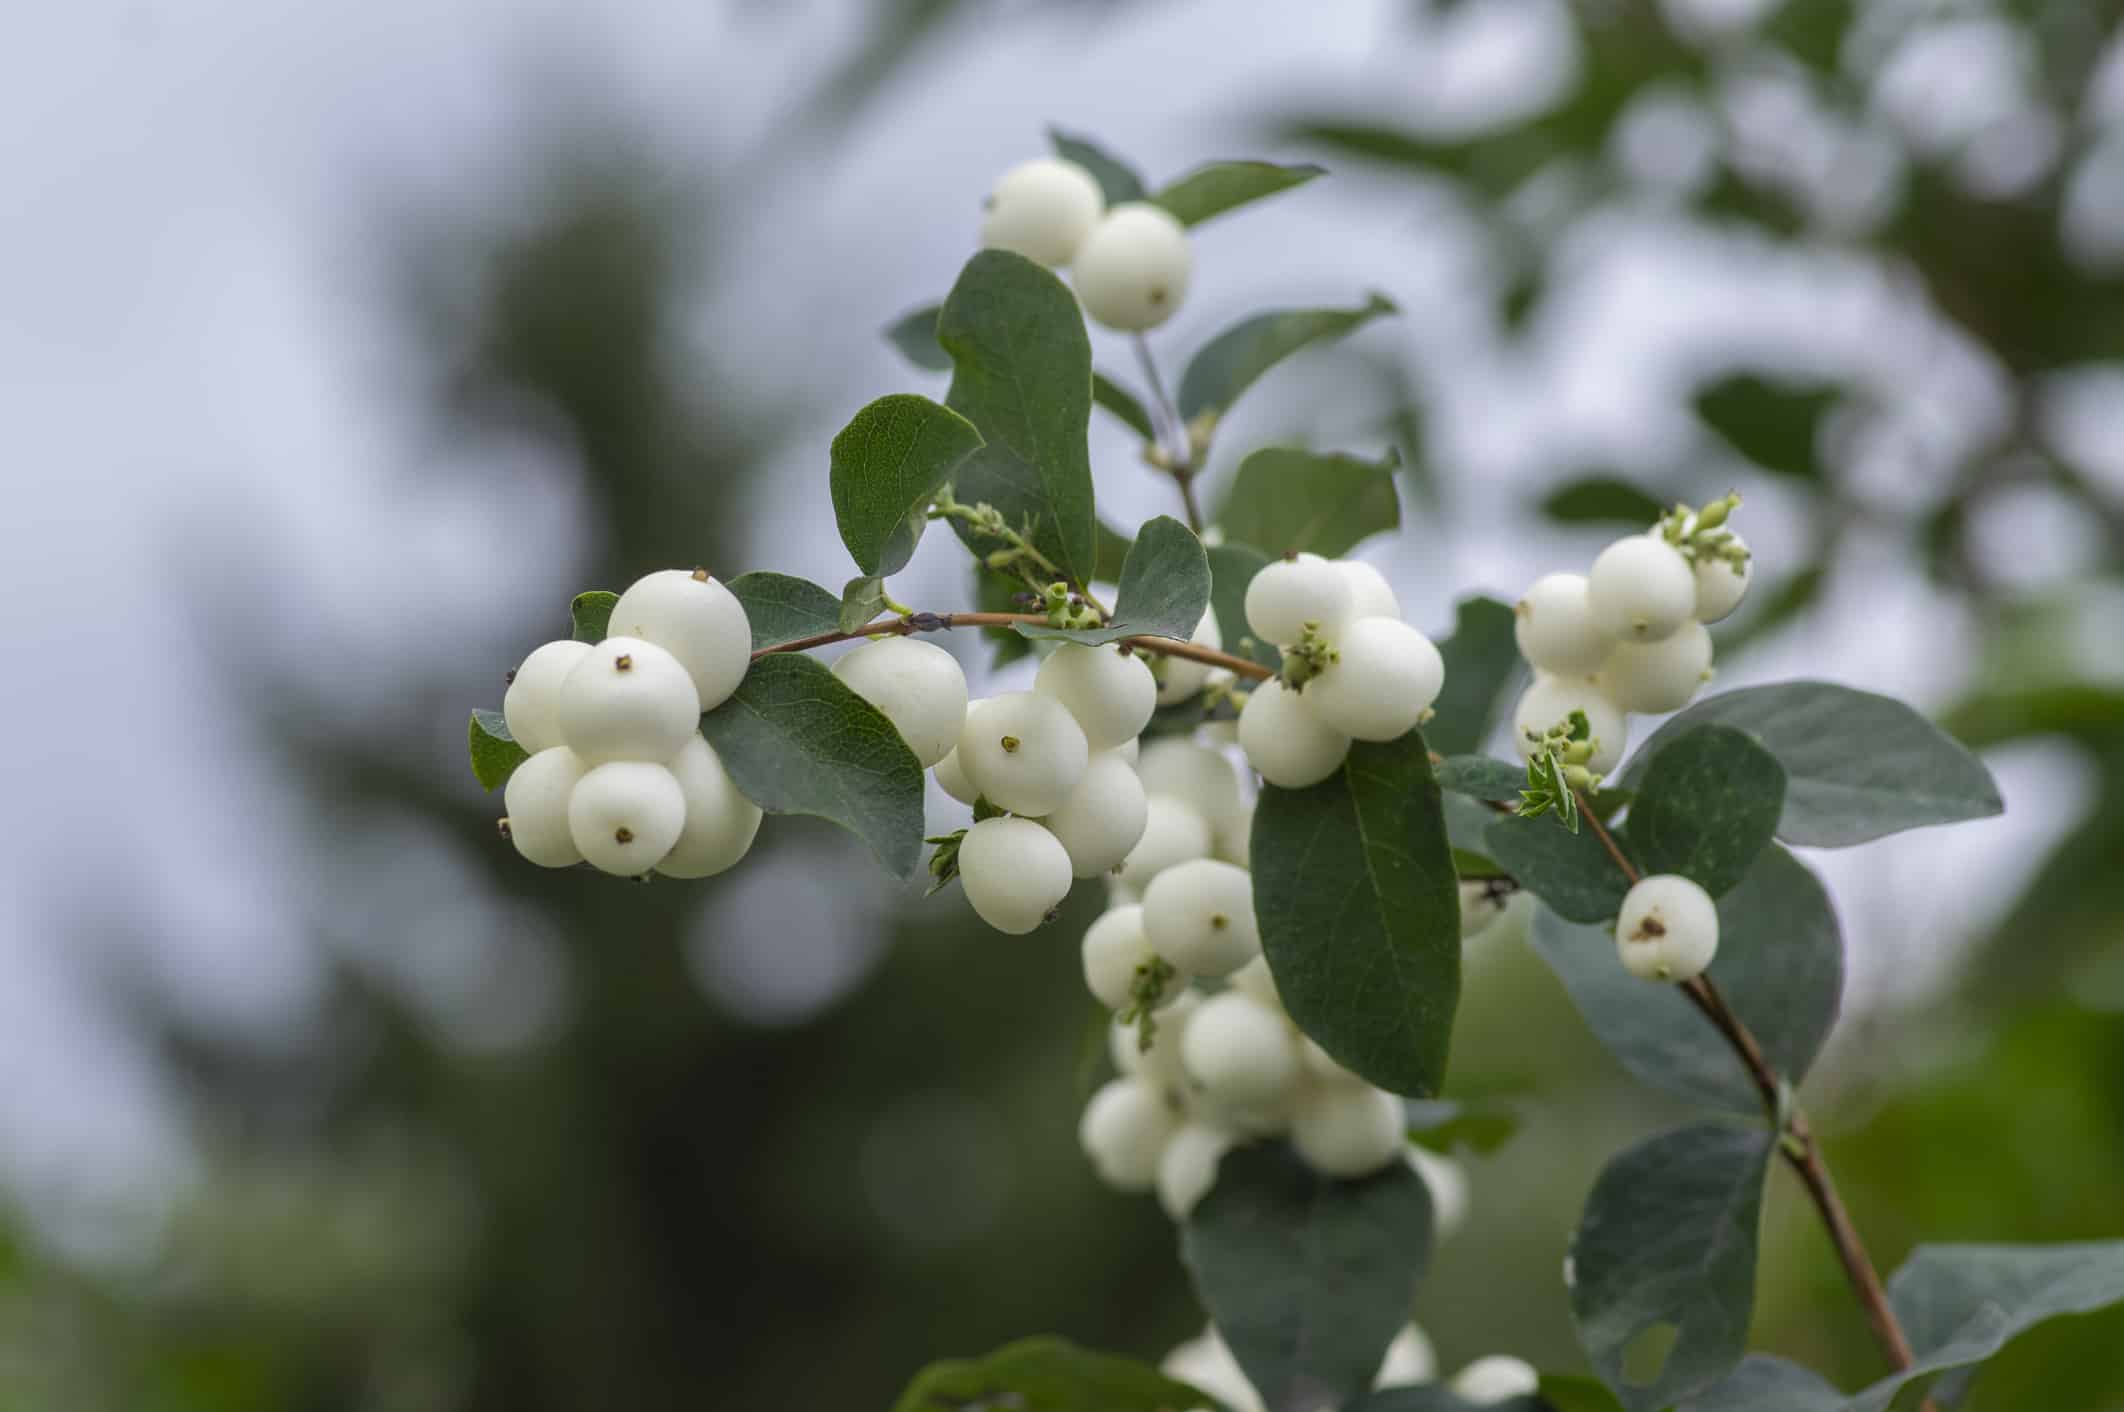 Detail of snow berries white on Symphoricarpos albus branches, beautiful ornamental ripened autumnal white fruits in daylight